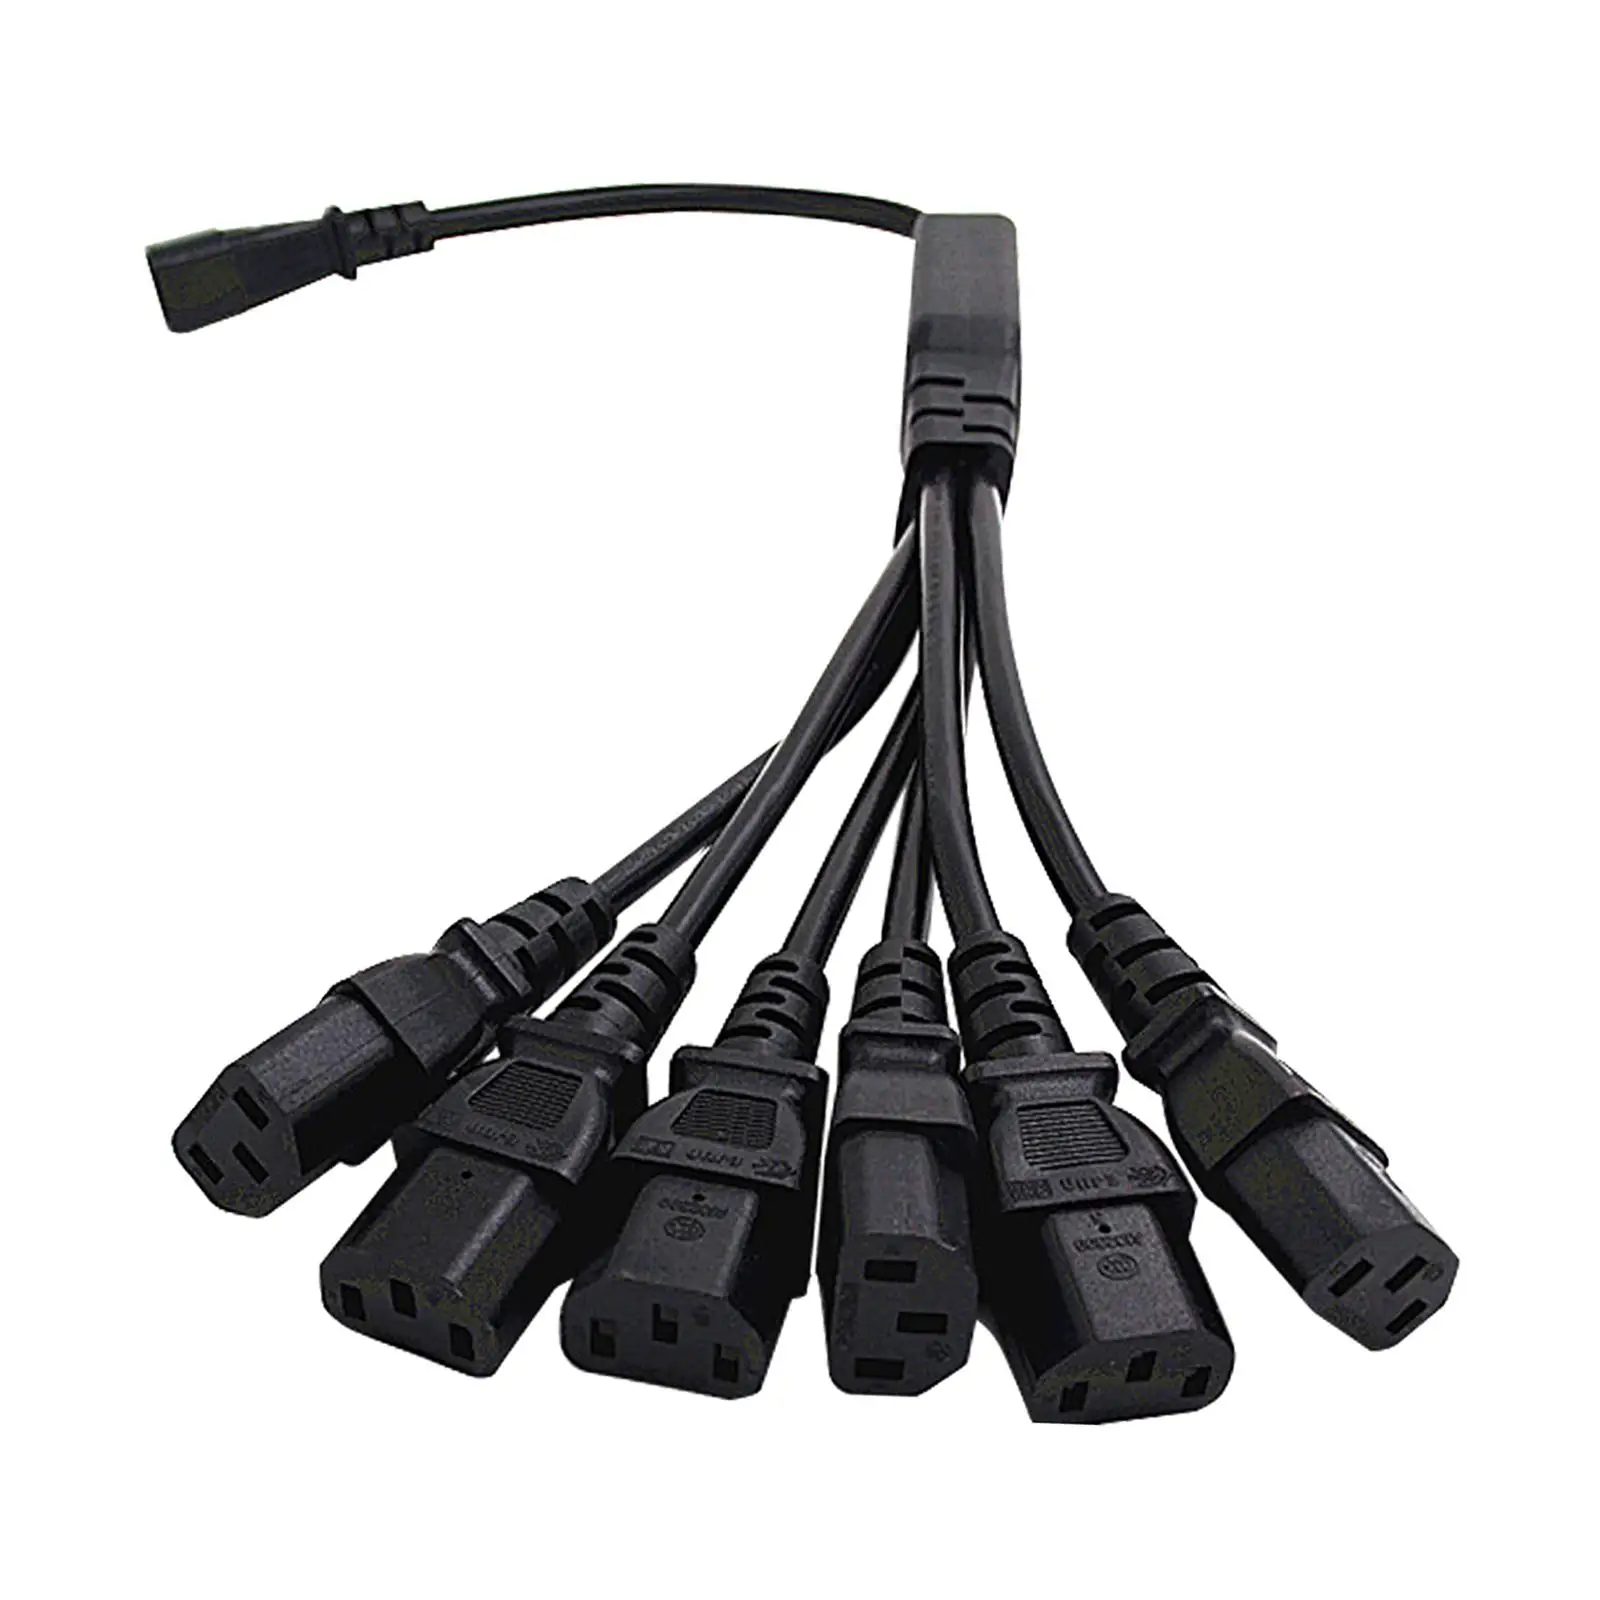 Pdu Ups System C14 Male to 6x C13 Female Y Splitter Extension Cord 10A 250V 2500W 0.6M for Printer Monitor PC Computer Projector